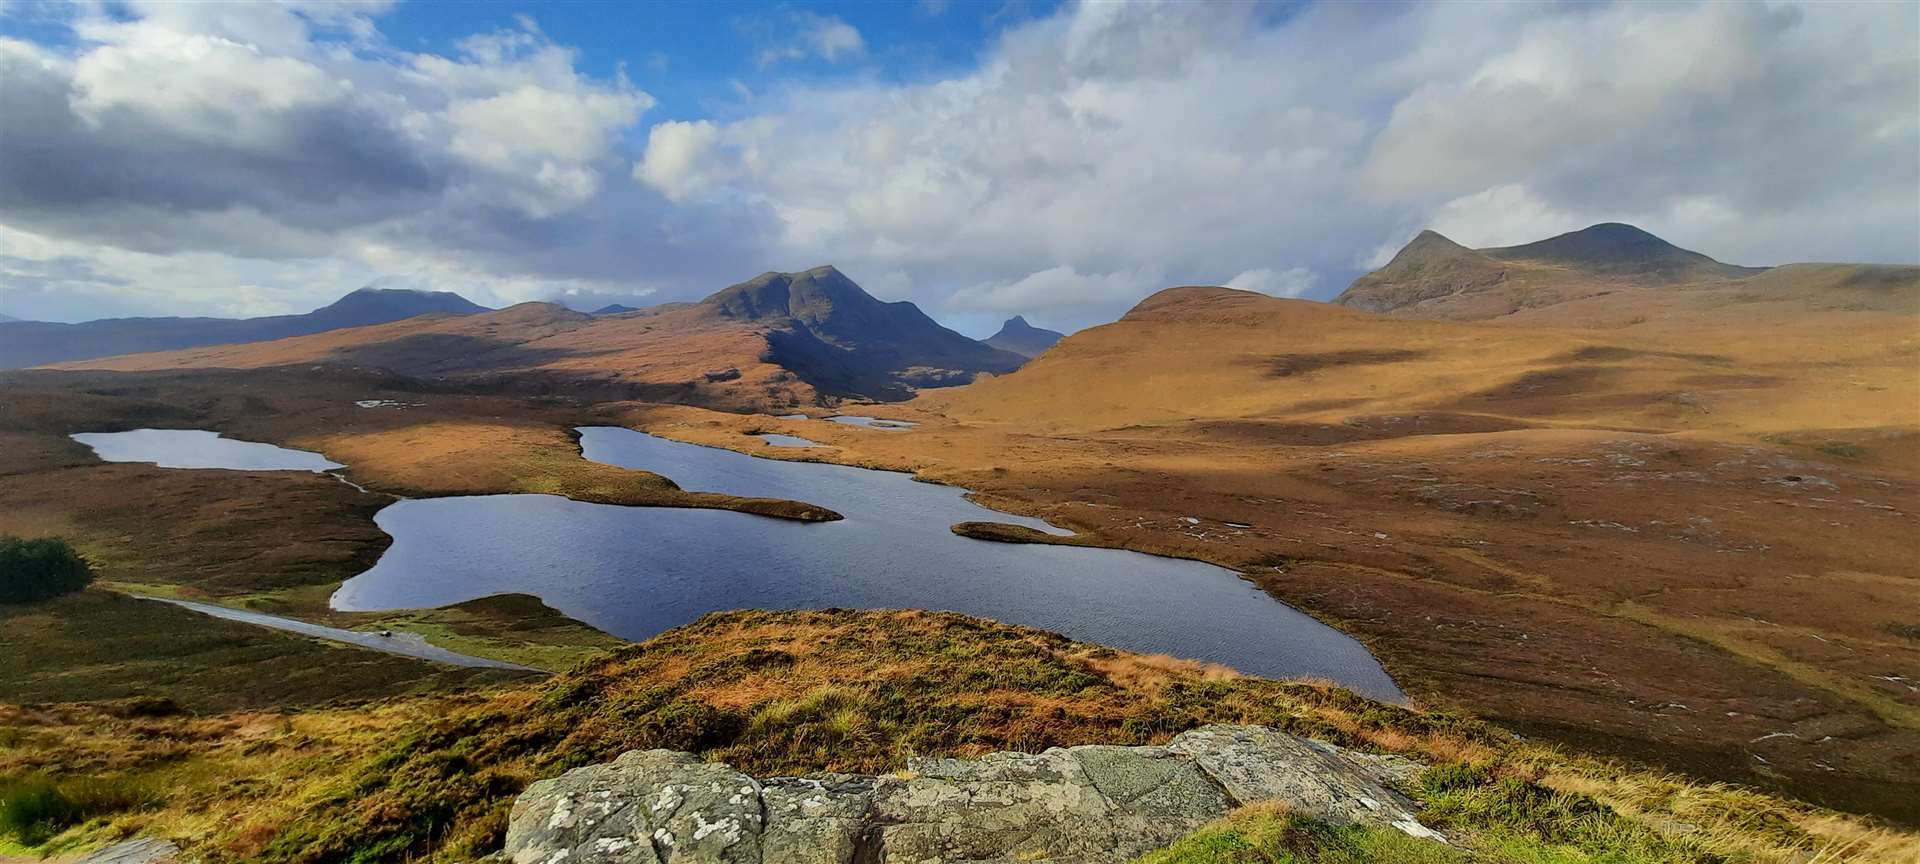 The view from the top of the crag over Lochan an Ais to Cul Beag. Stac Pollaidh and Cul Mor.